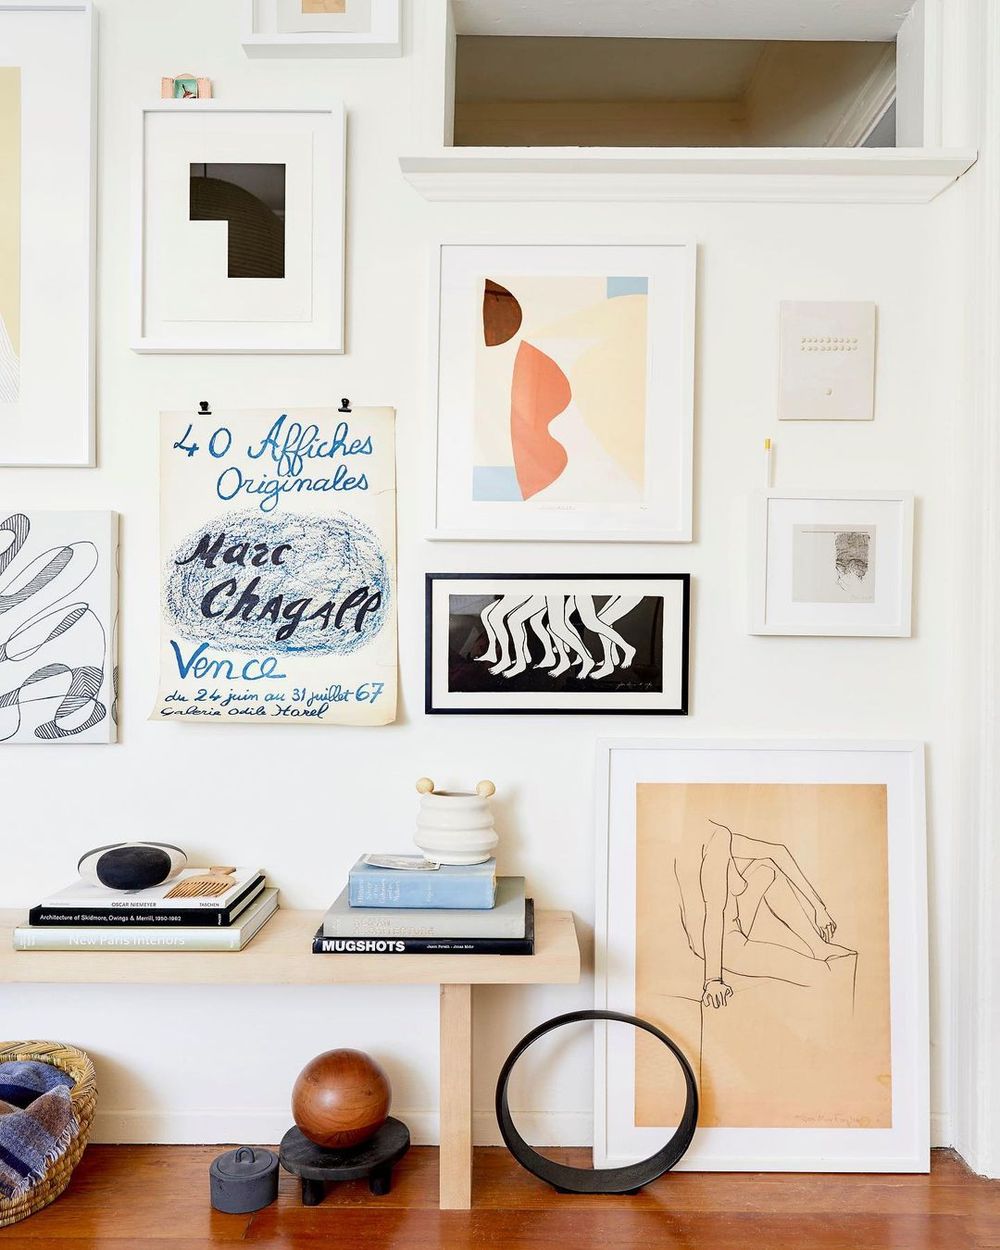 How to Make a Gallery Wall at Home via @em_henderson